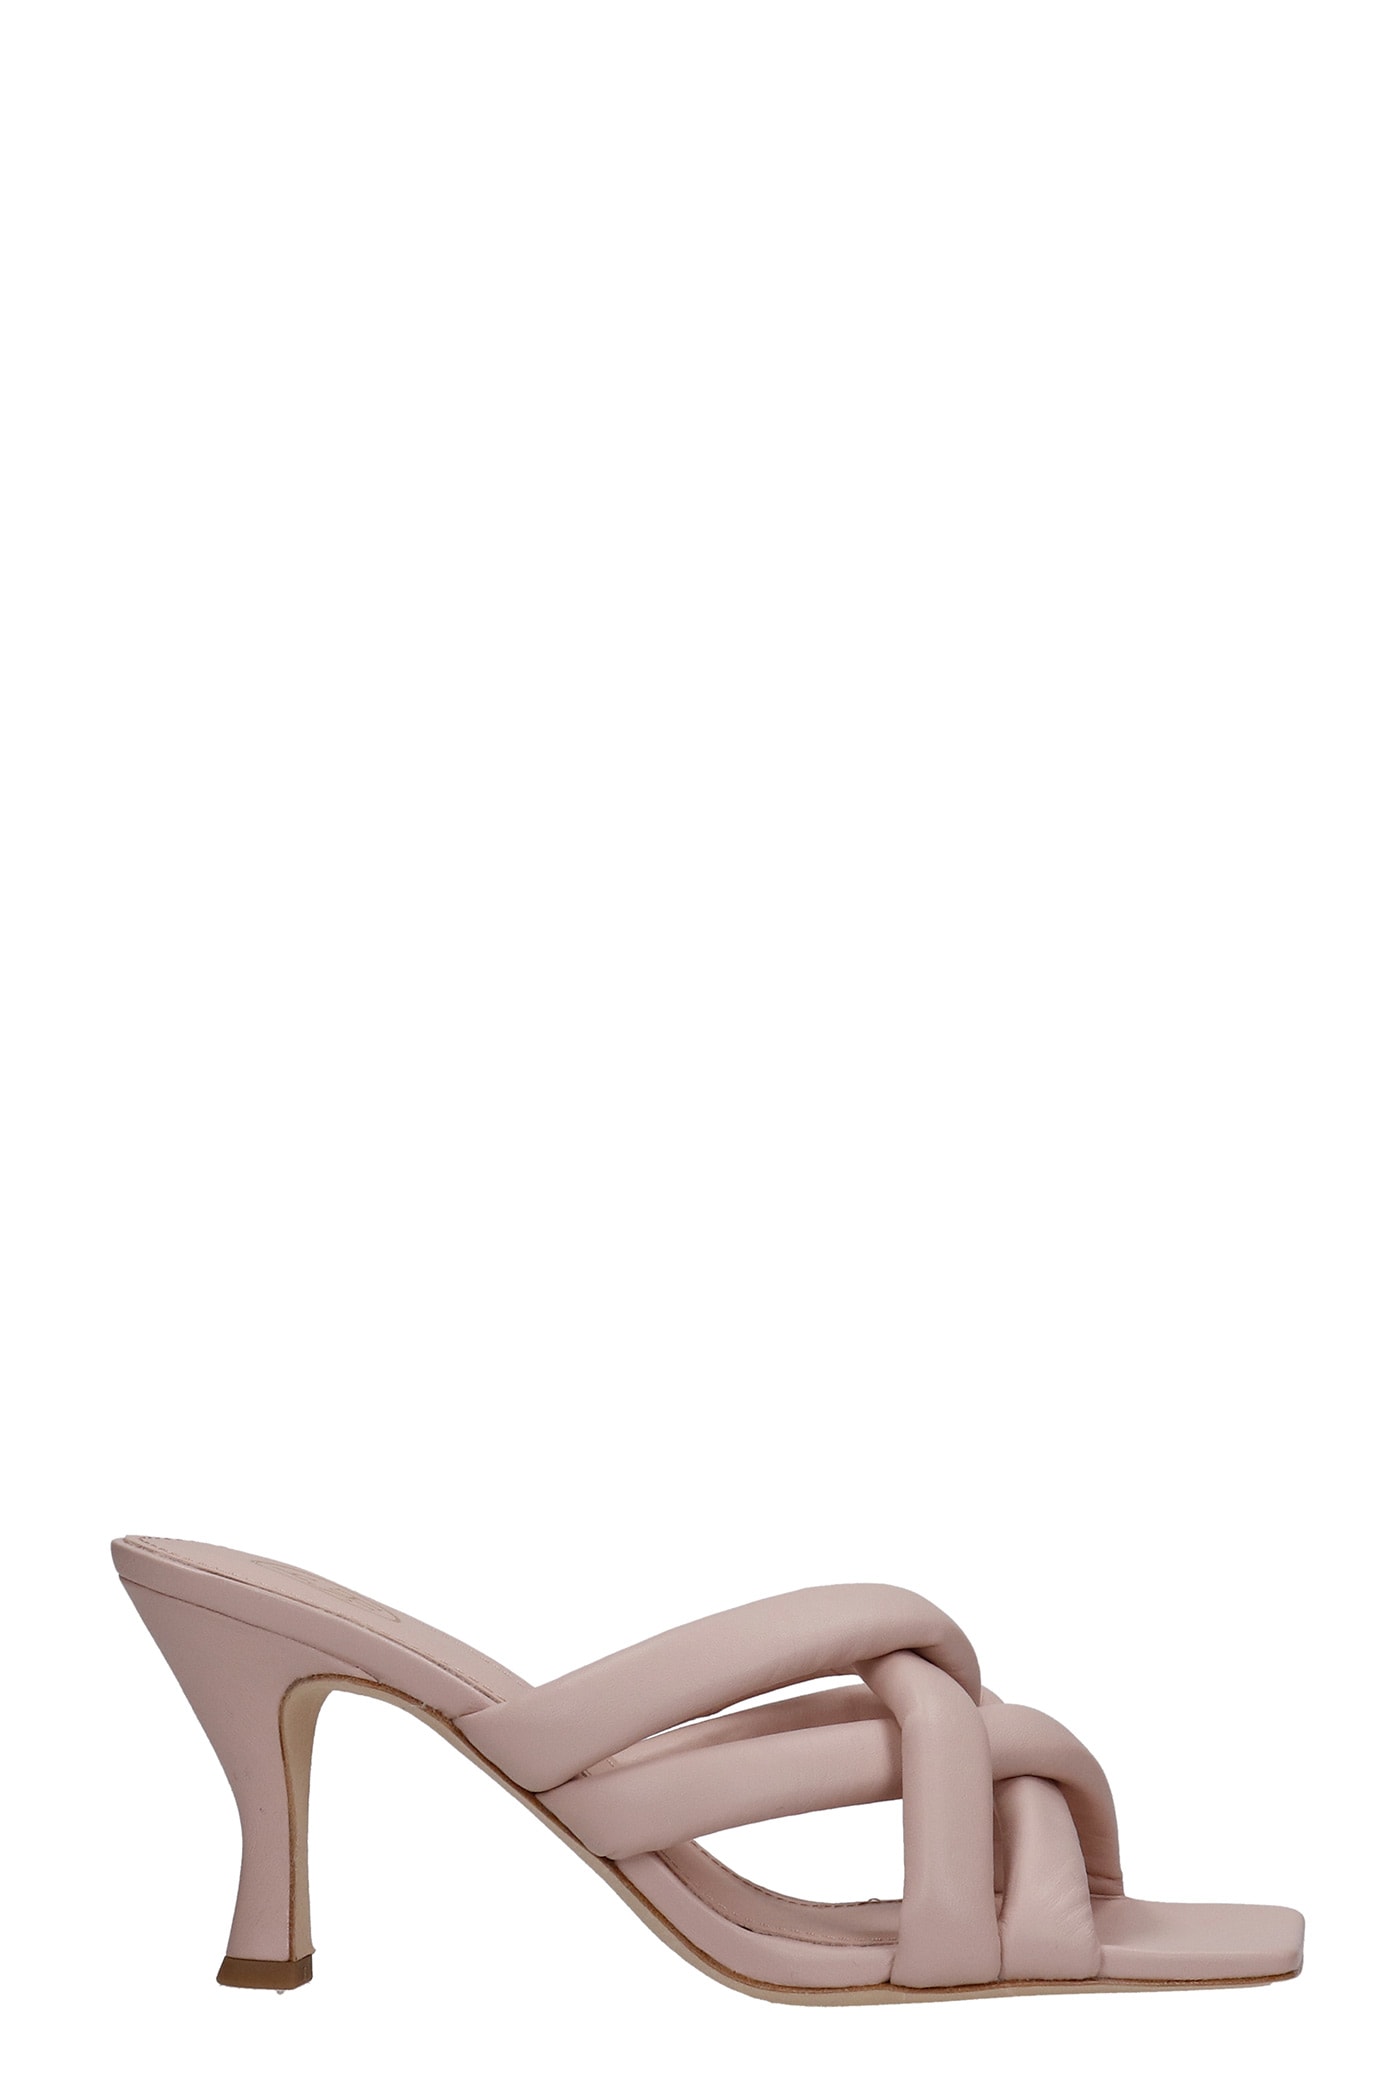 Ash Mina 02 Sandals In Rose-pink Leather